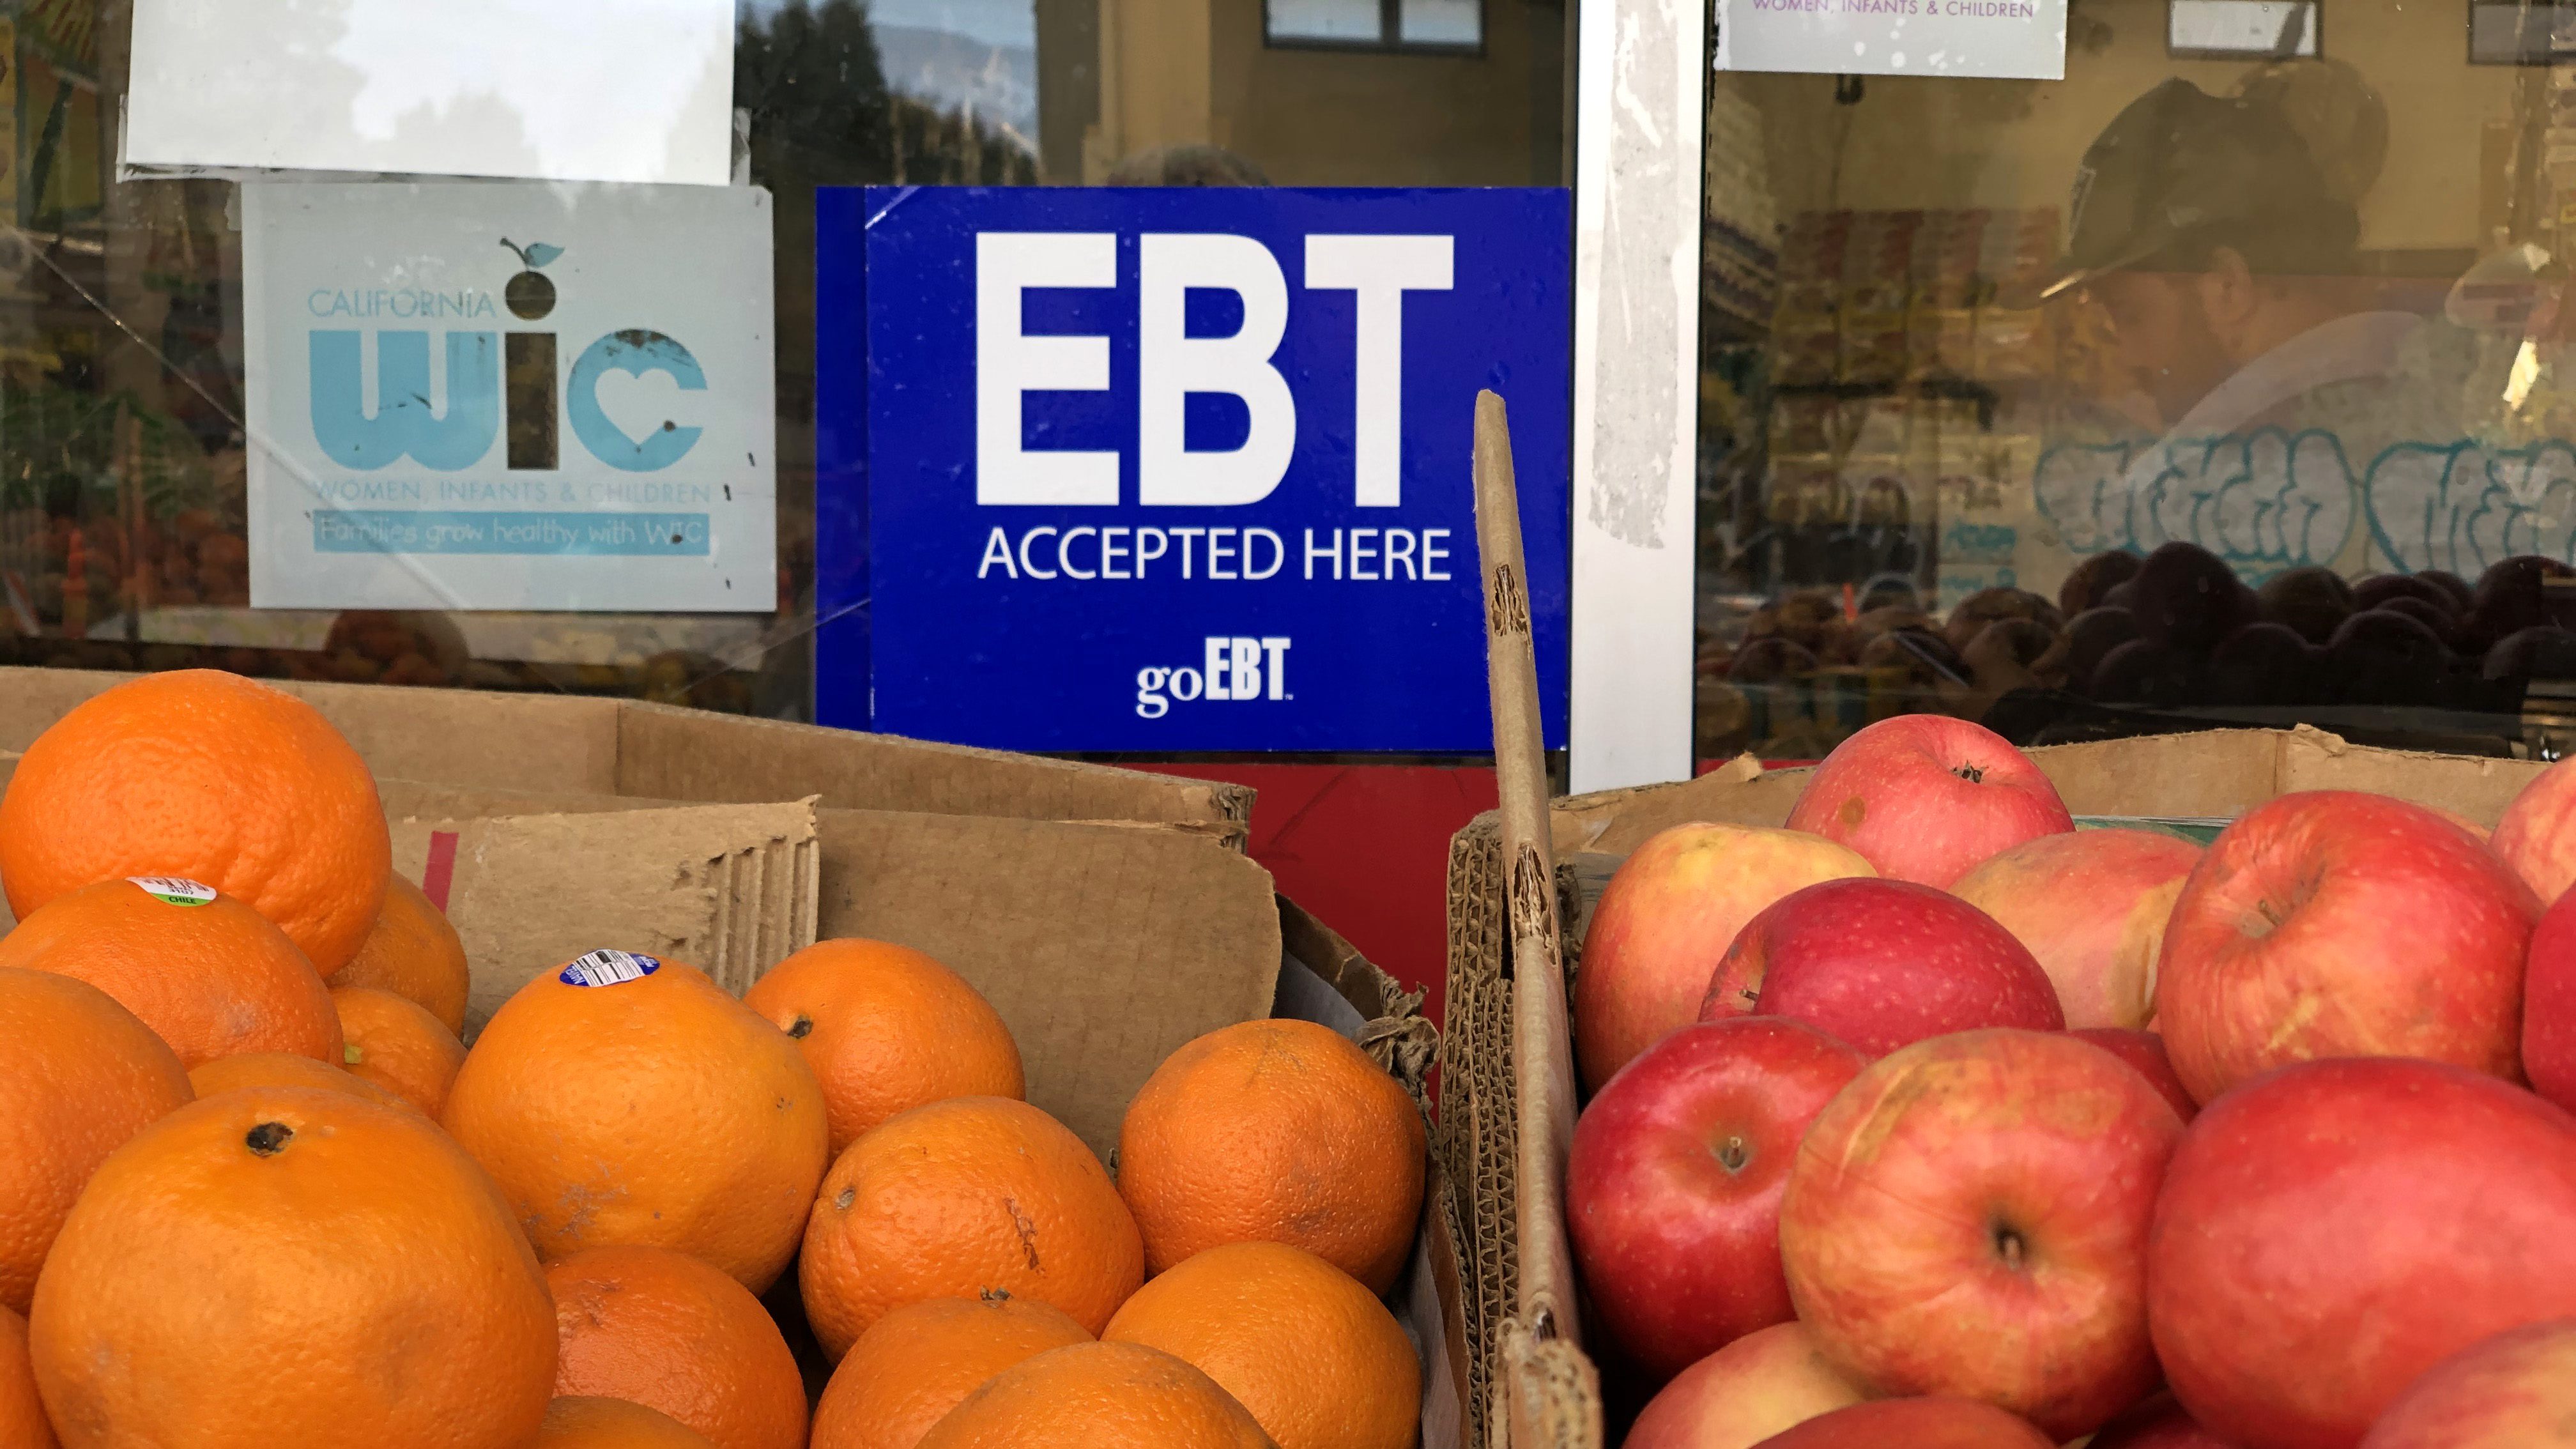 How to Use SNAP EBT Online at Walmart - Food Stamps Now